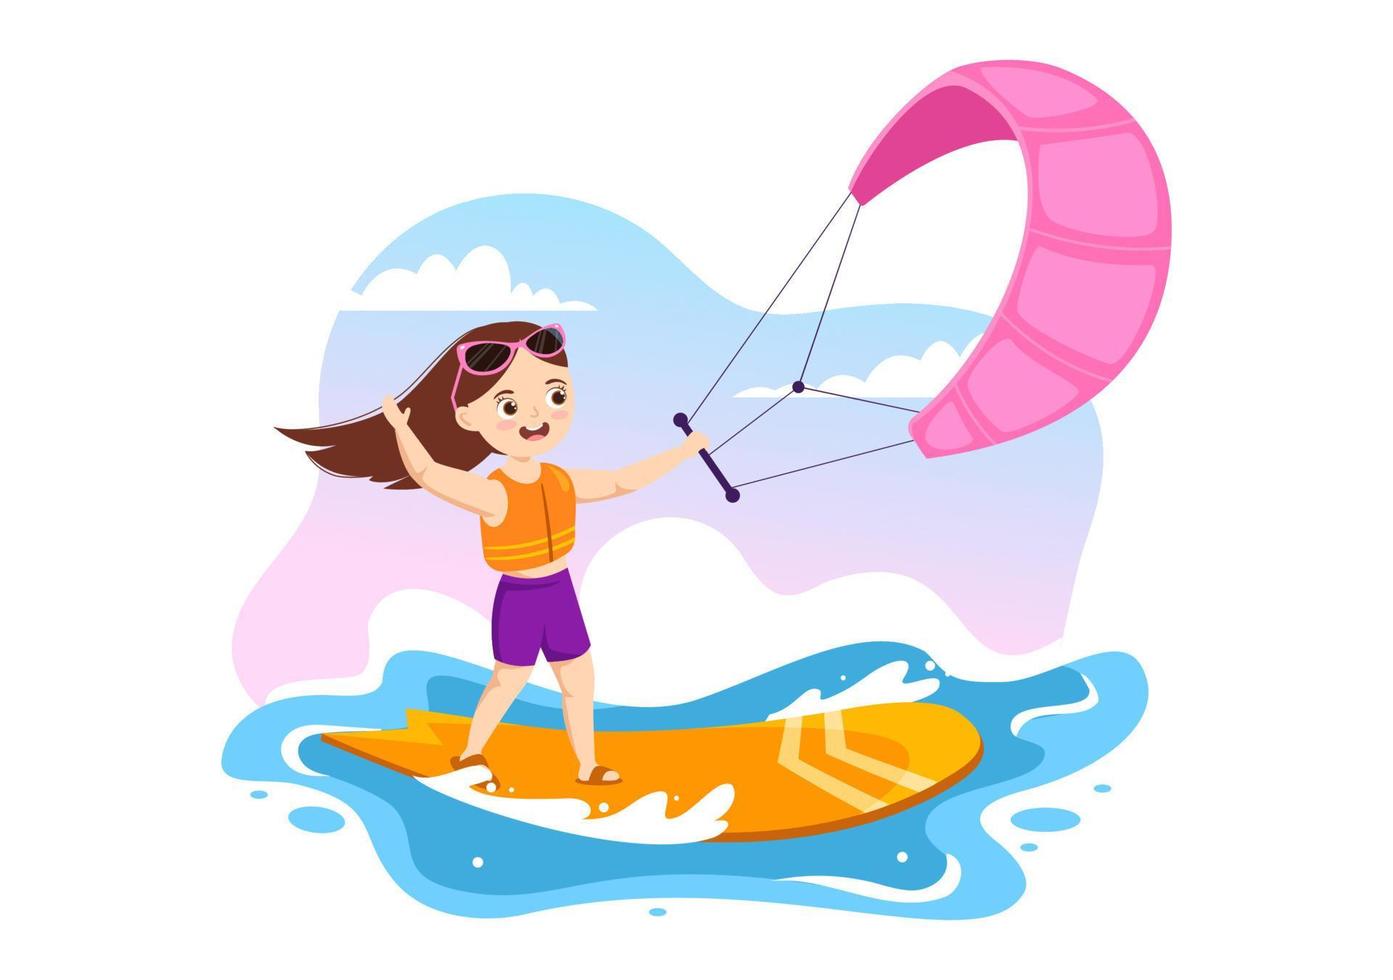 Kitesurfing Illustration with Kids Kite Surfer Standing on Kiteboard in the Summer Sea in Extreme Water Sports Flat Cartoon Hand Drawn Template vector